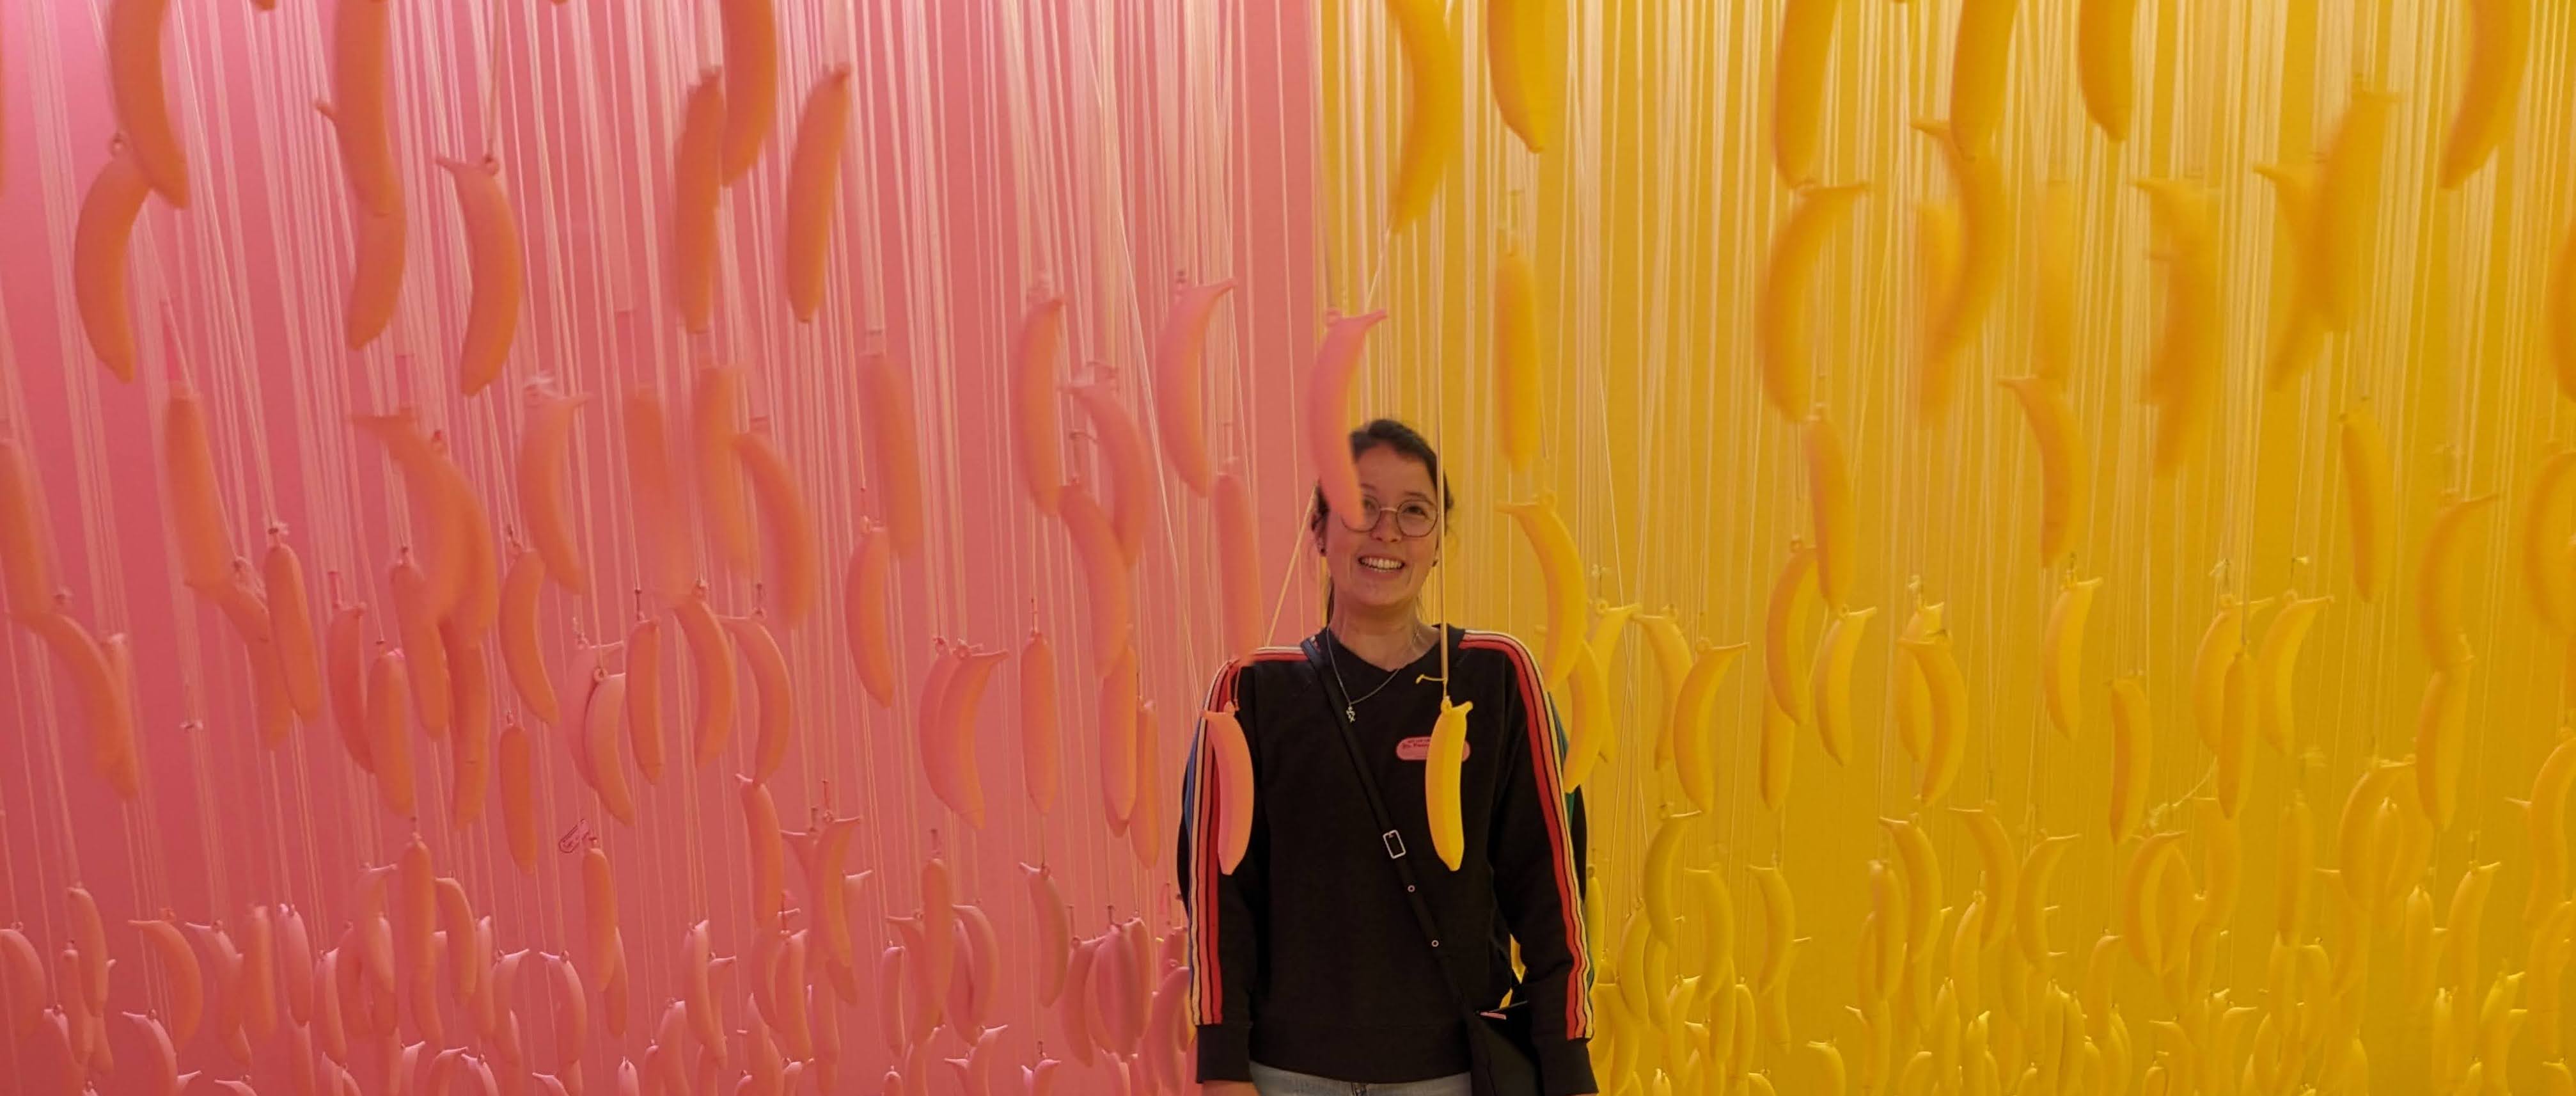 half-asian female a ponytail and glasses standing in front of a half-pink, half-yellow room with bananas hanging from strings in matching colors